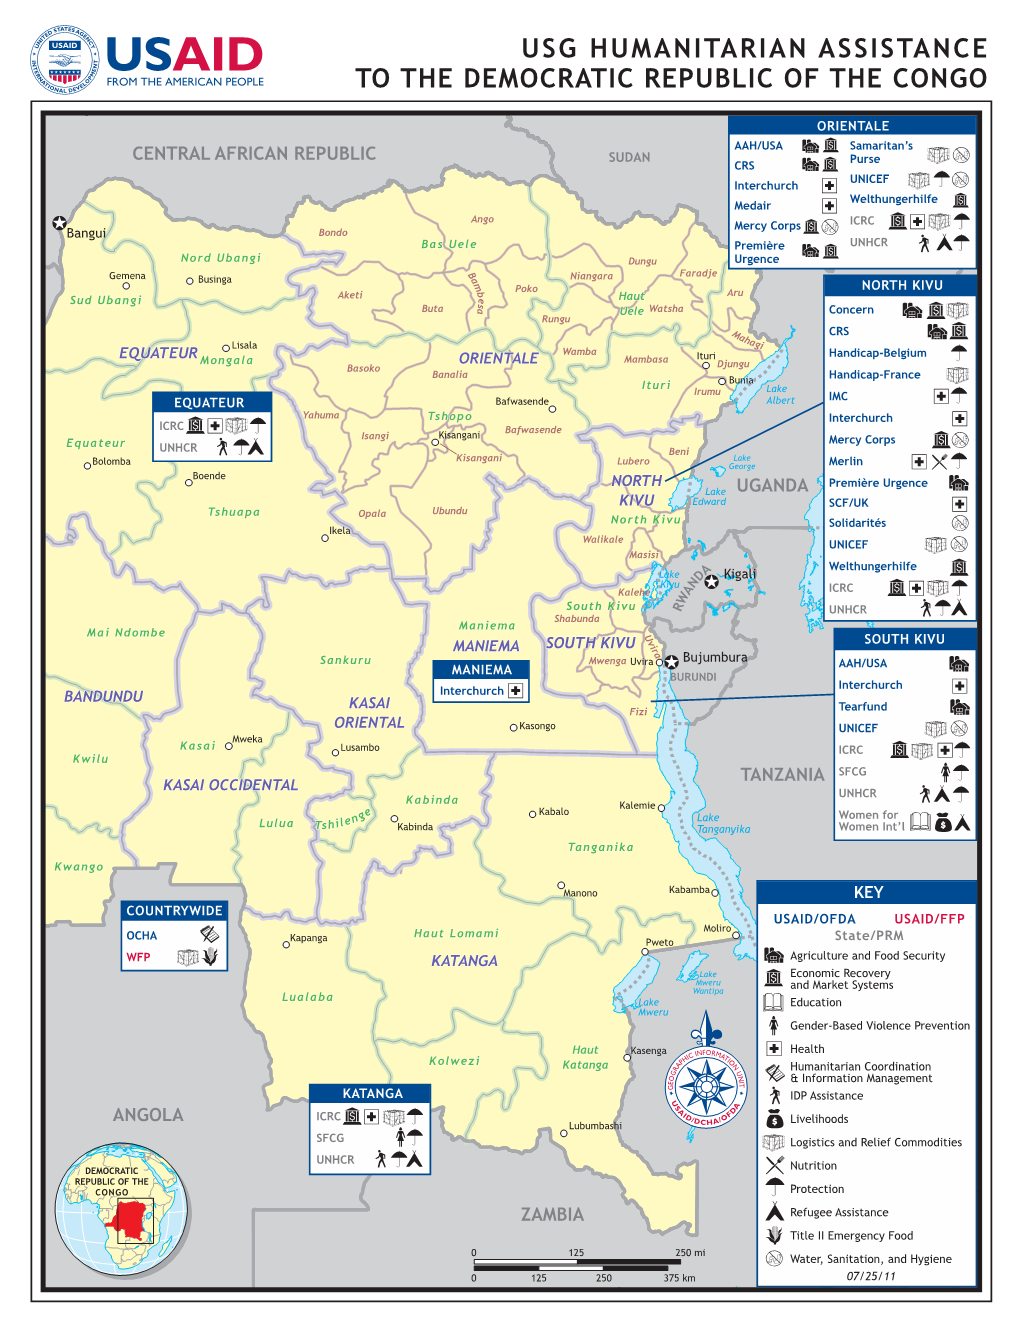 Usg Humanitarian Assistance to the Democratic Republic of the Congo